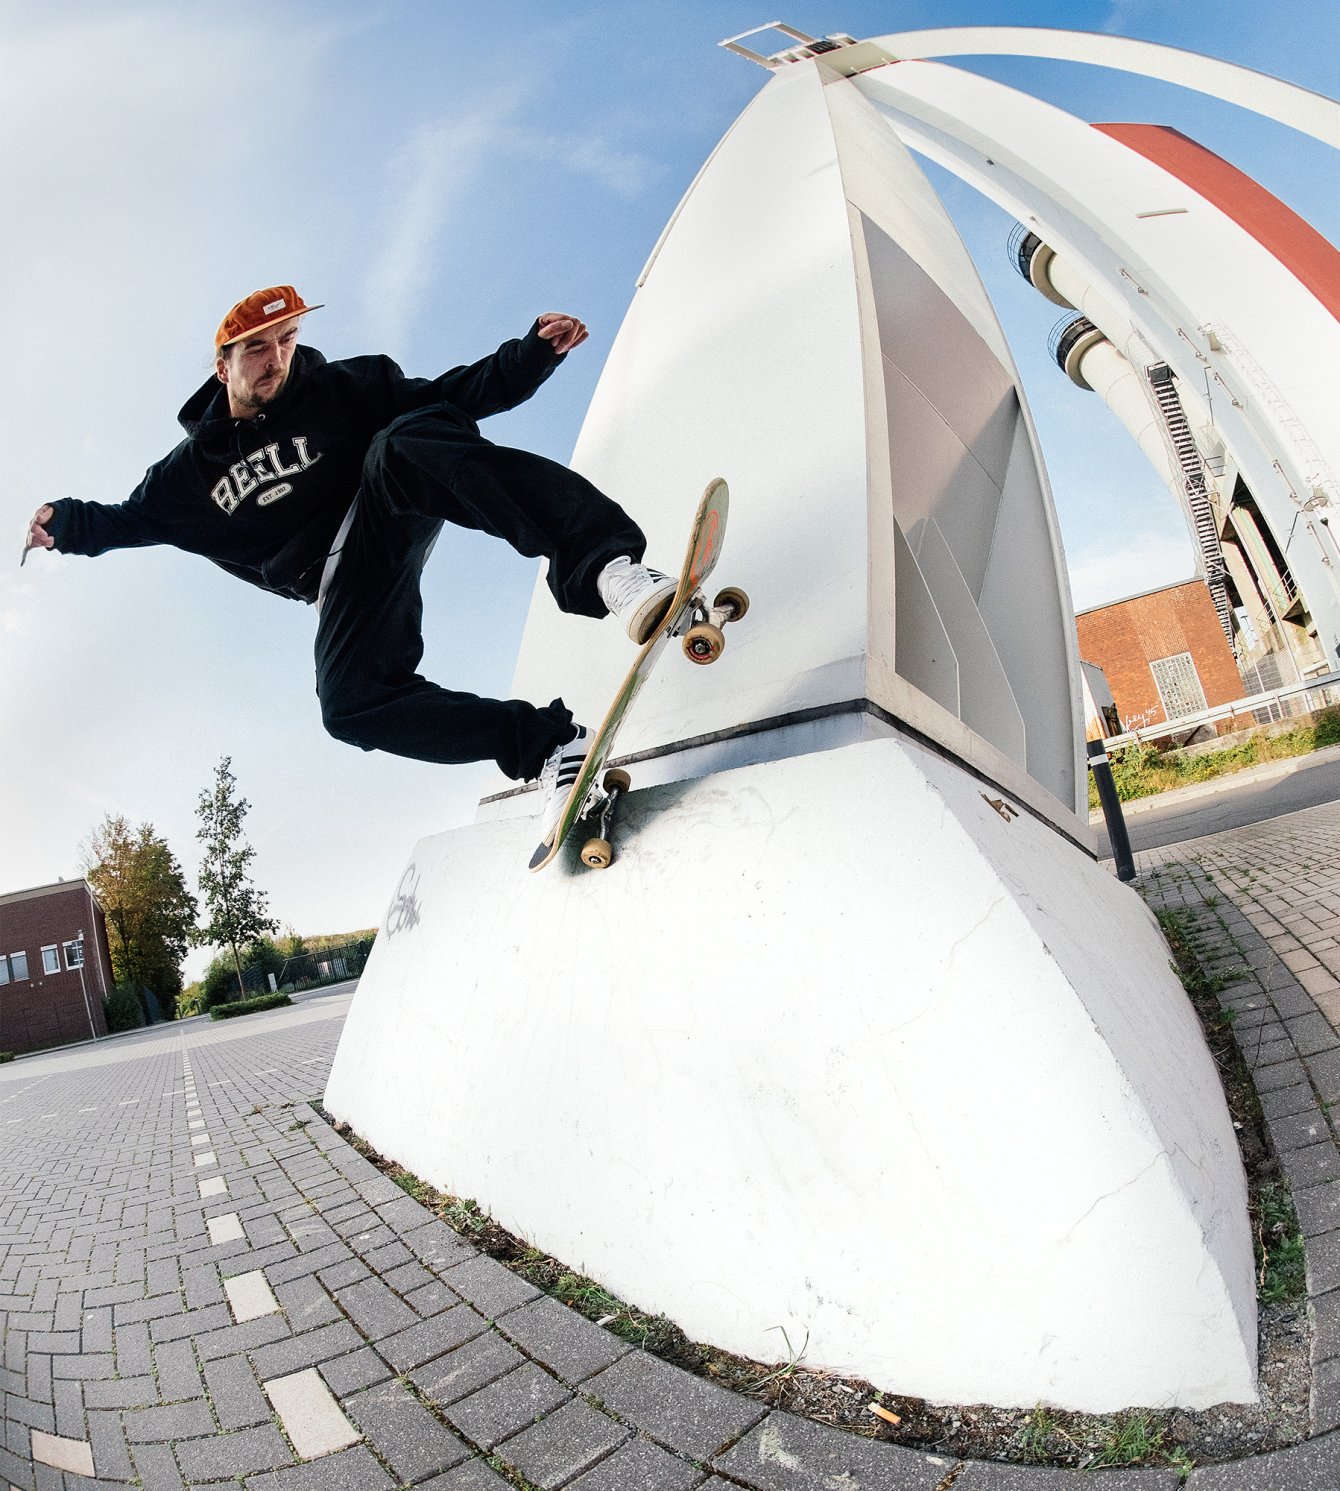 Patrick-Wenz-Wallride-to-Bs-5-0_preview